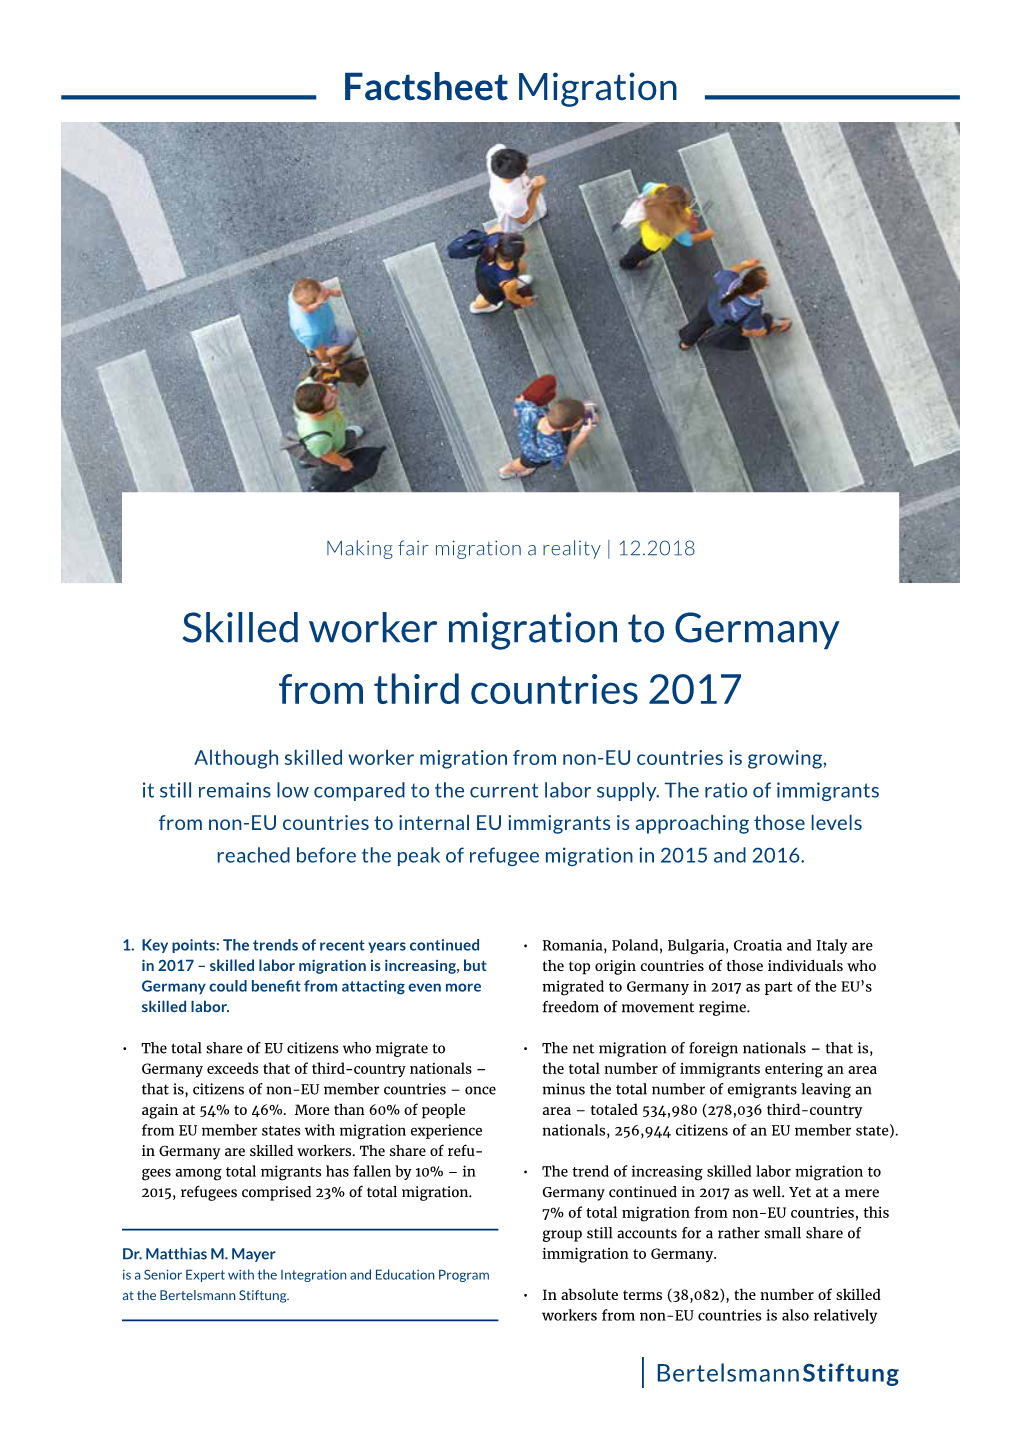 Skilled Worker Migration to Germany from Third Countries 2017